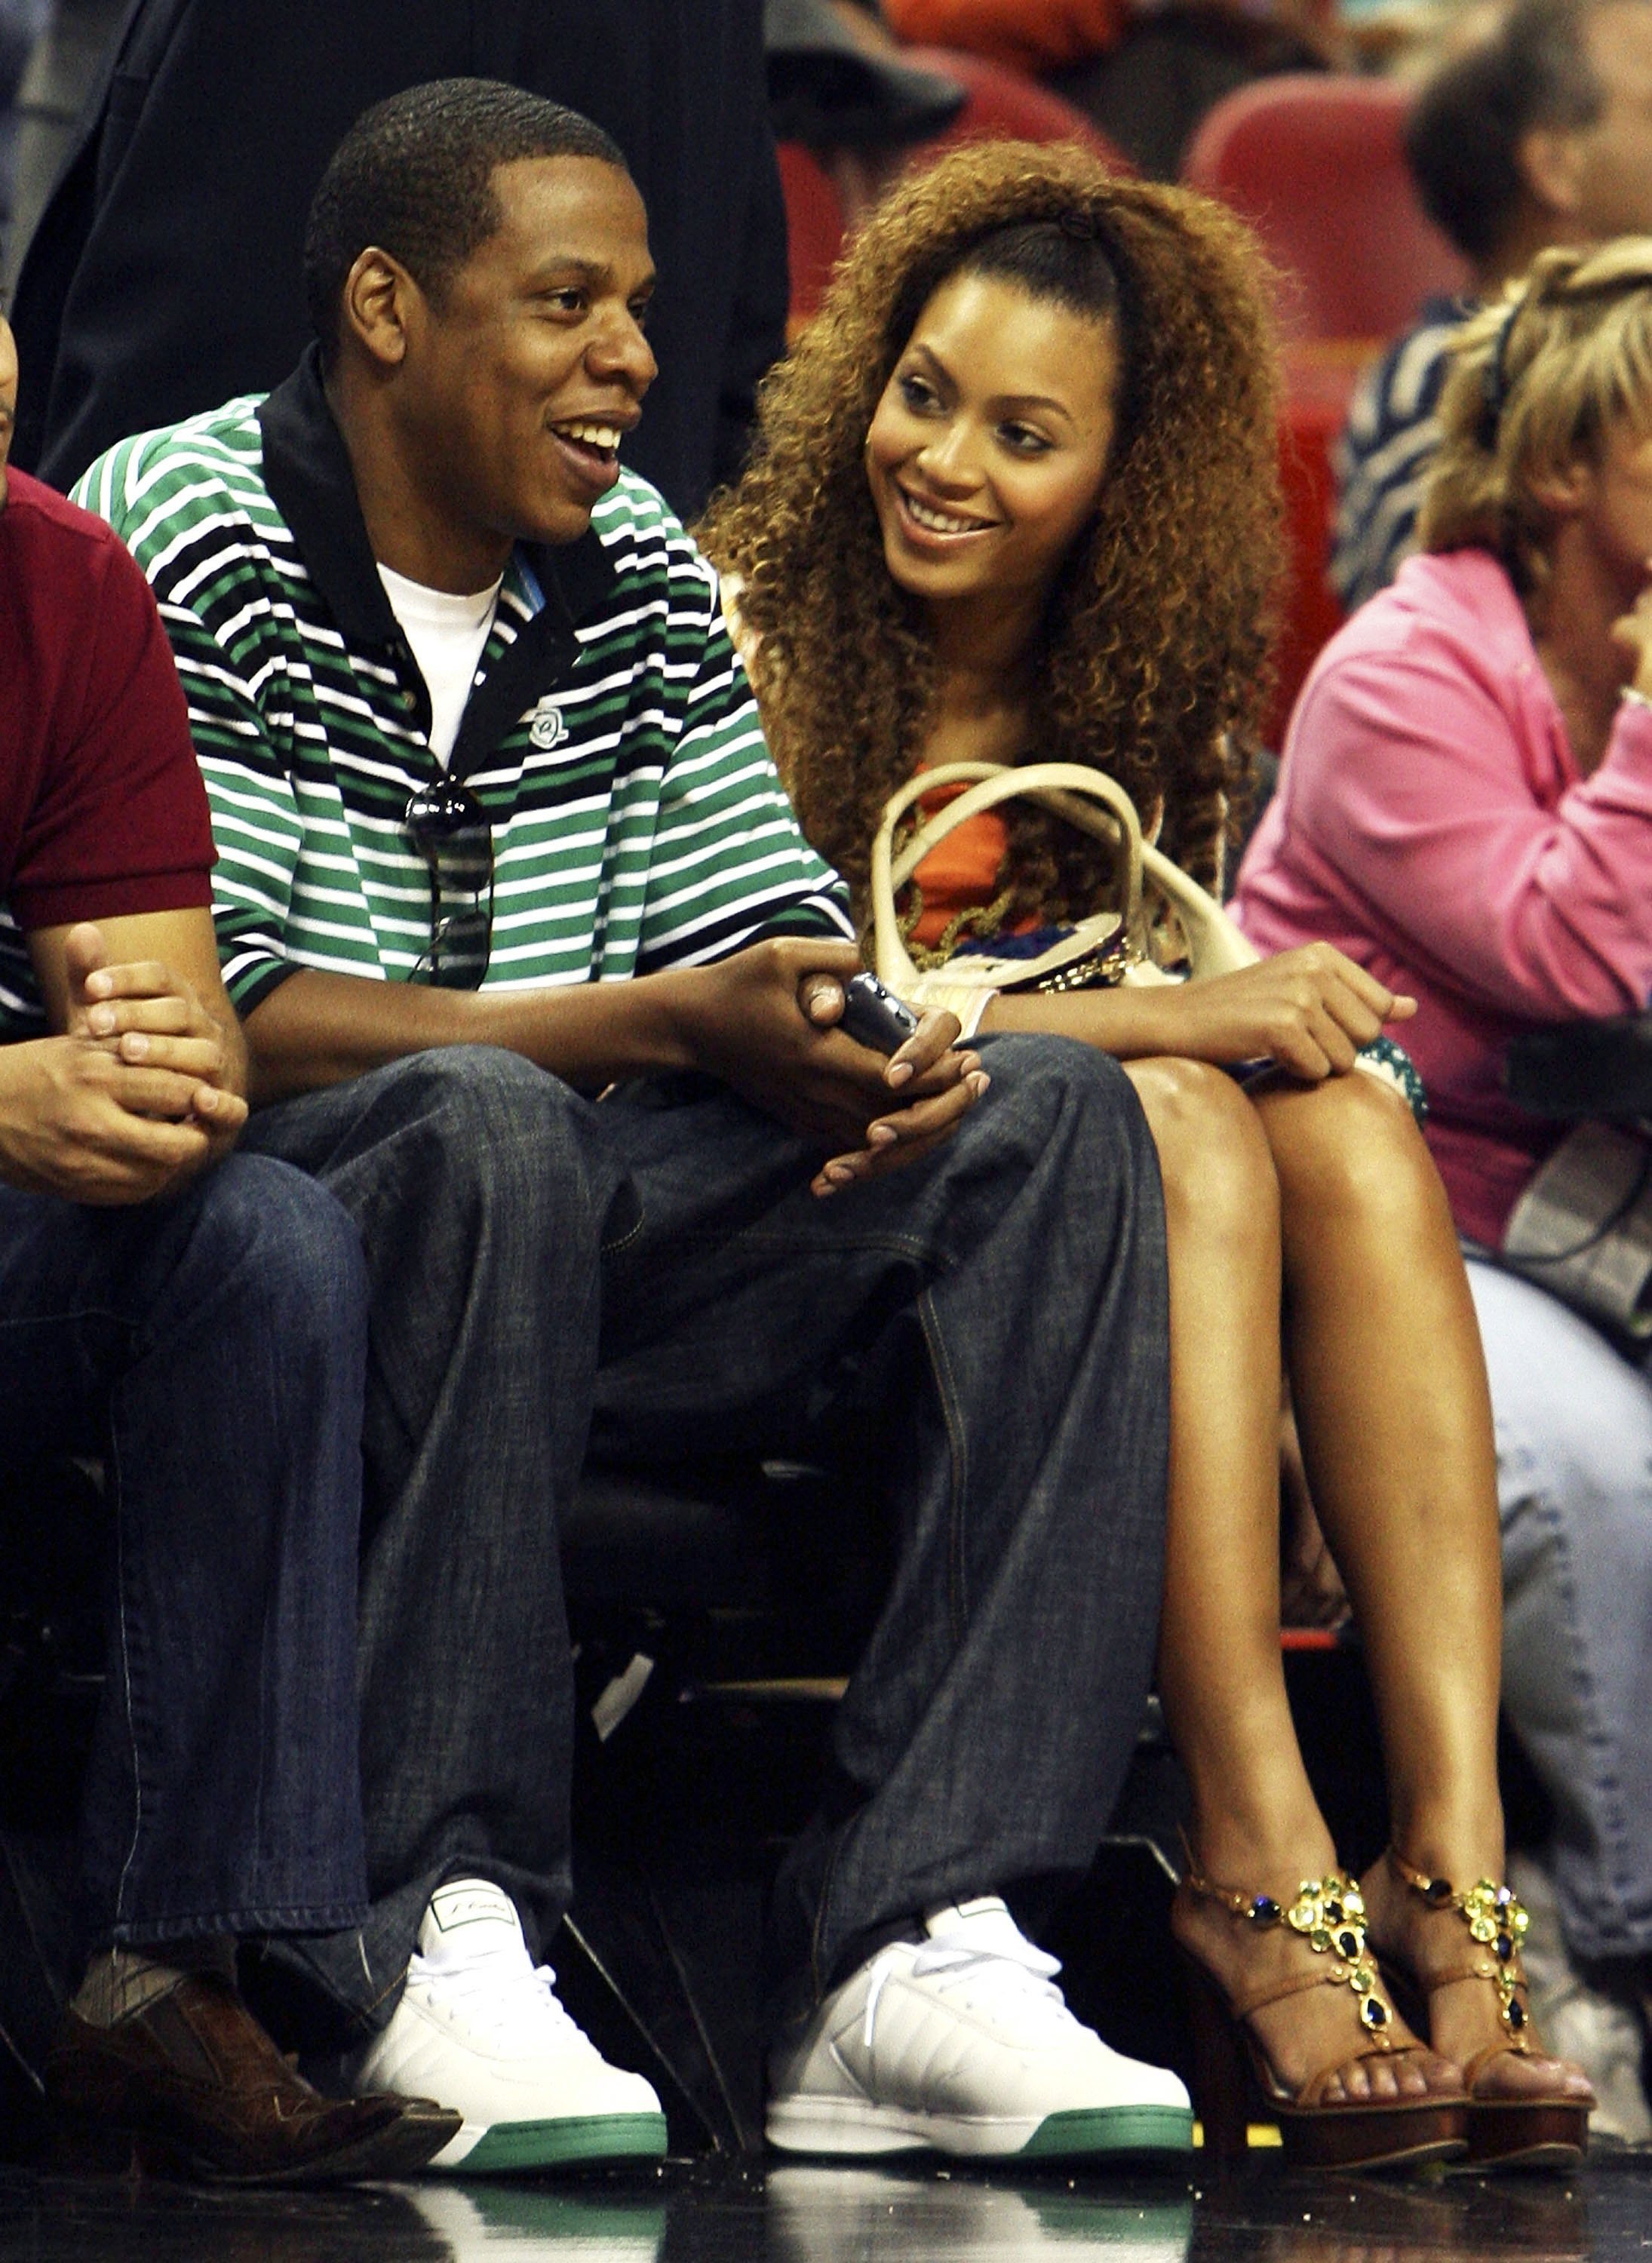 Jay-Z and Beyonce attend a game between the Toronto Raptors and the Miami Heat on April 11, 2006. | Photo: GettyImages